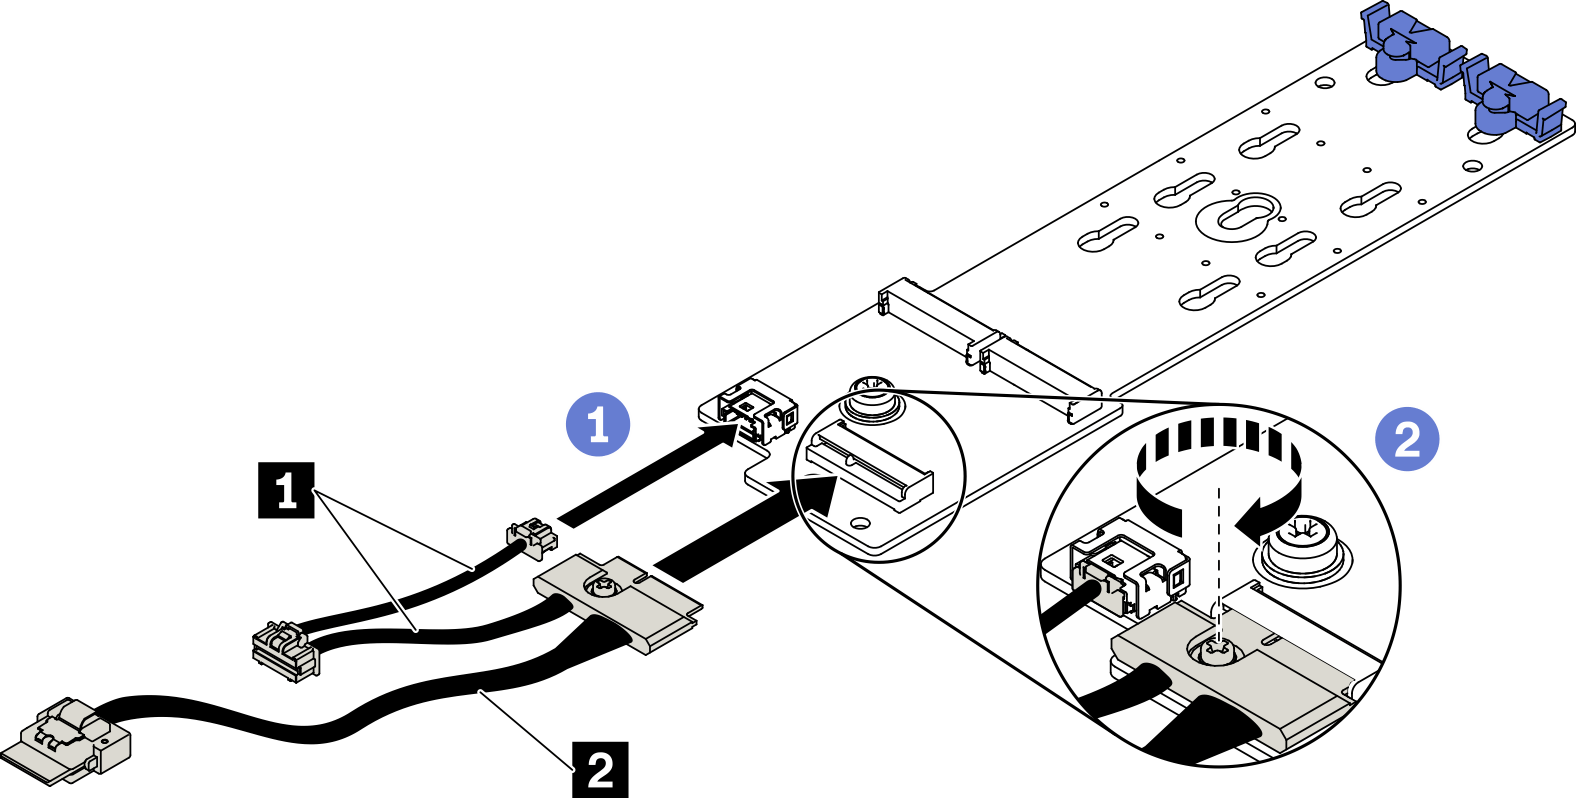 Connecting M.2 backplane cables to M.2 backplane